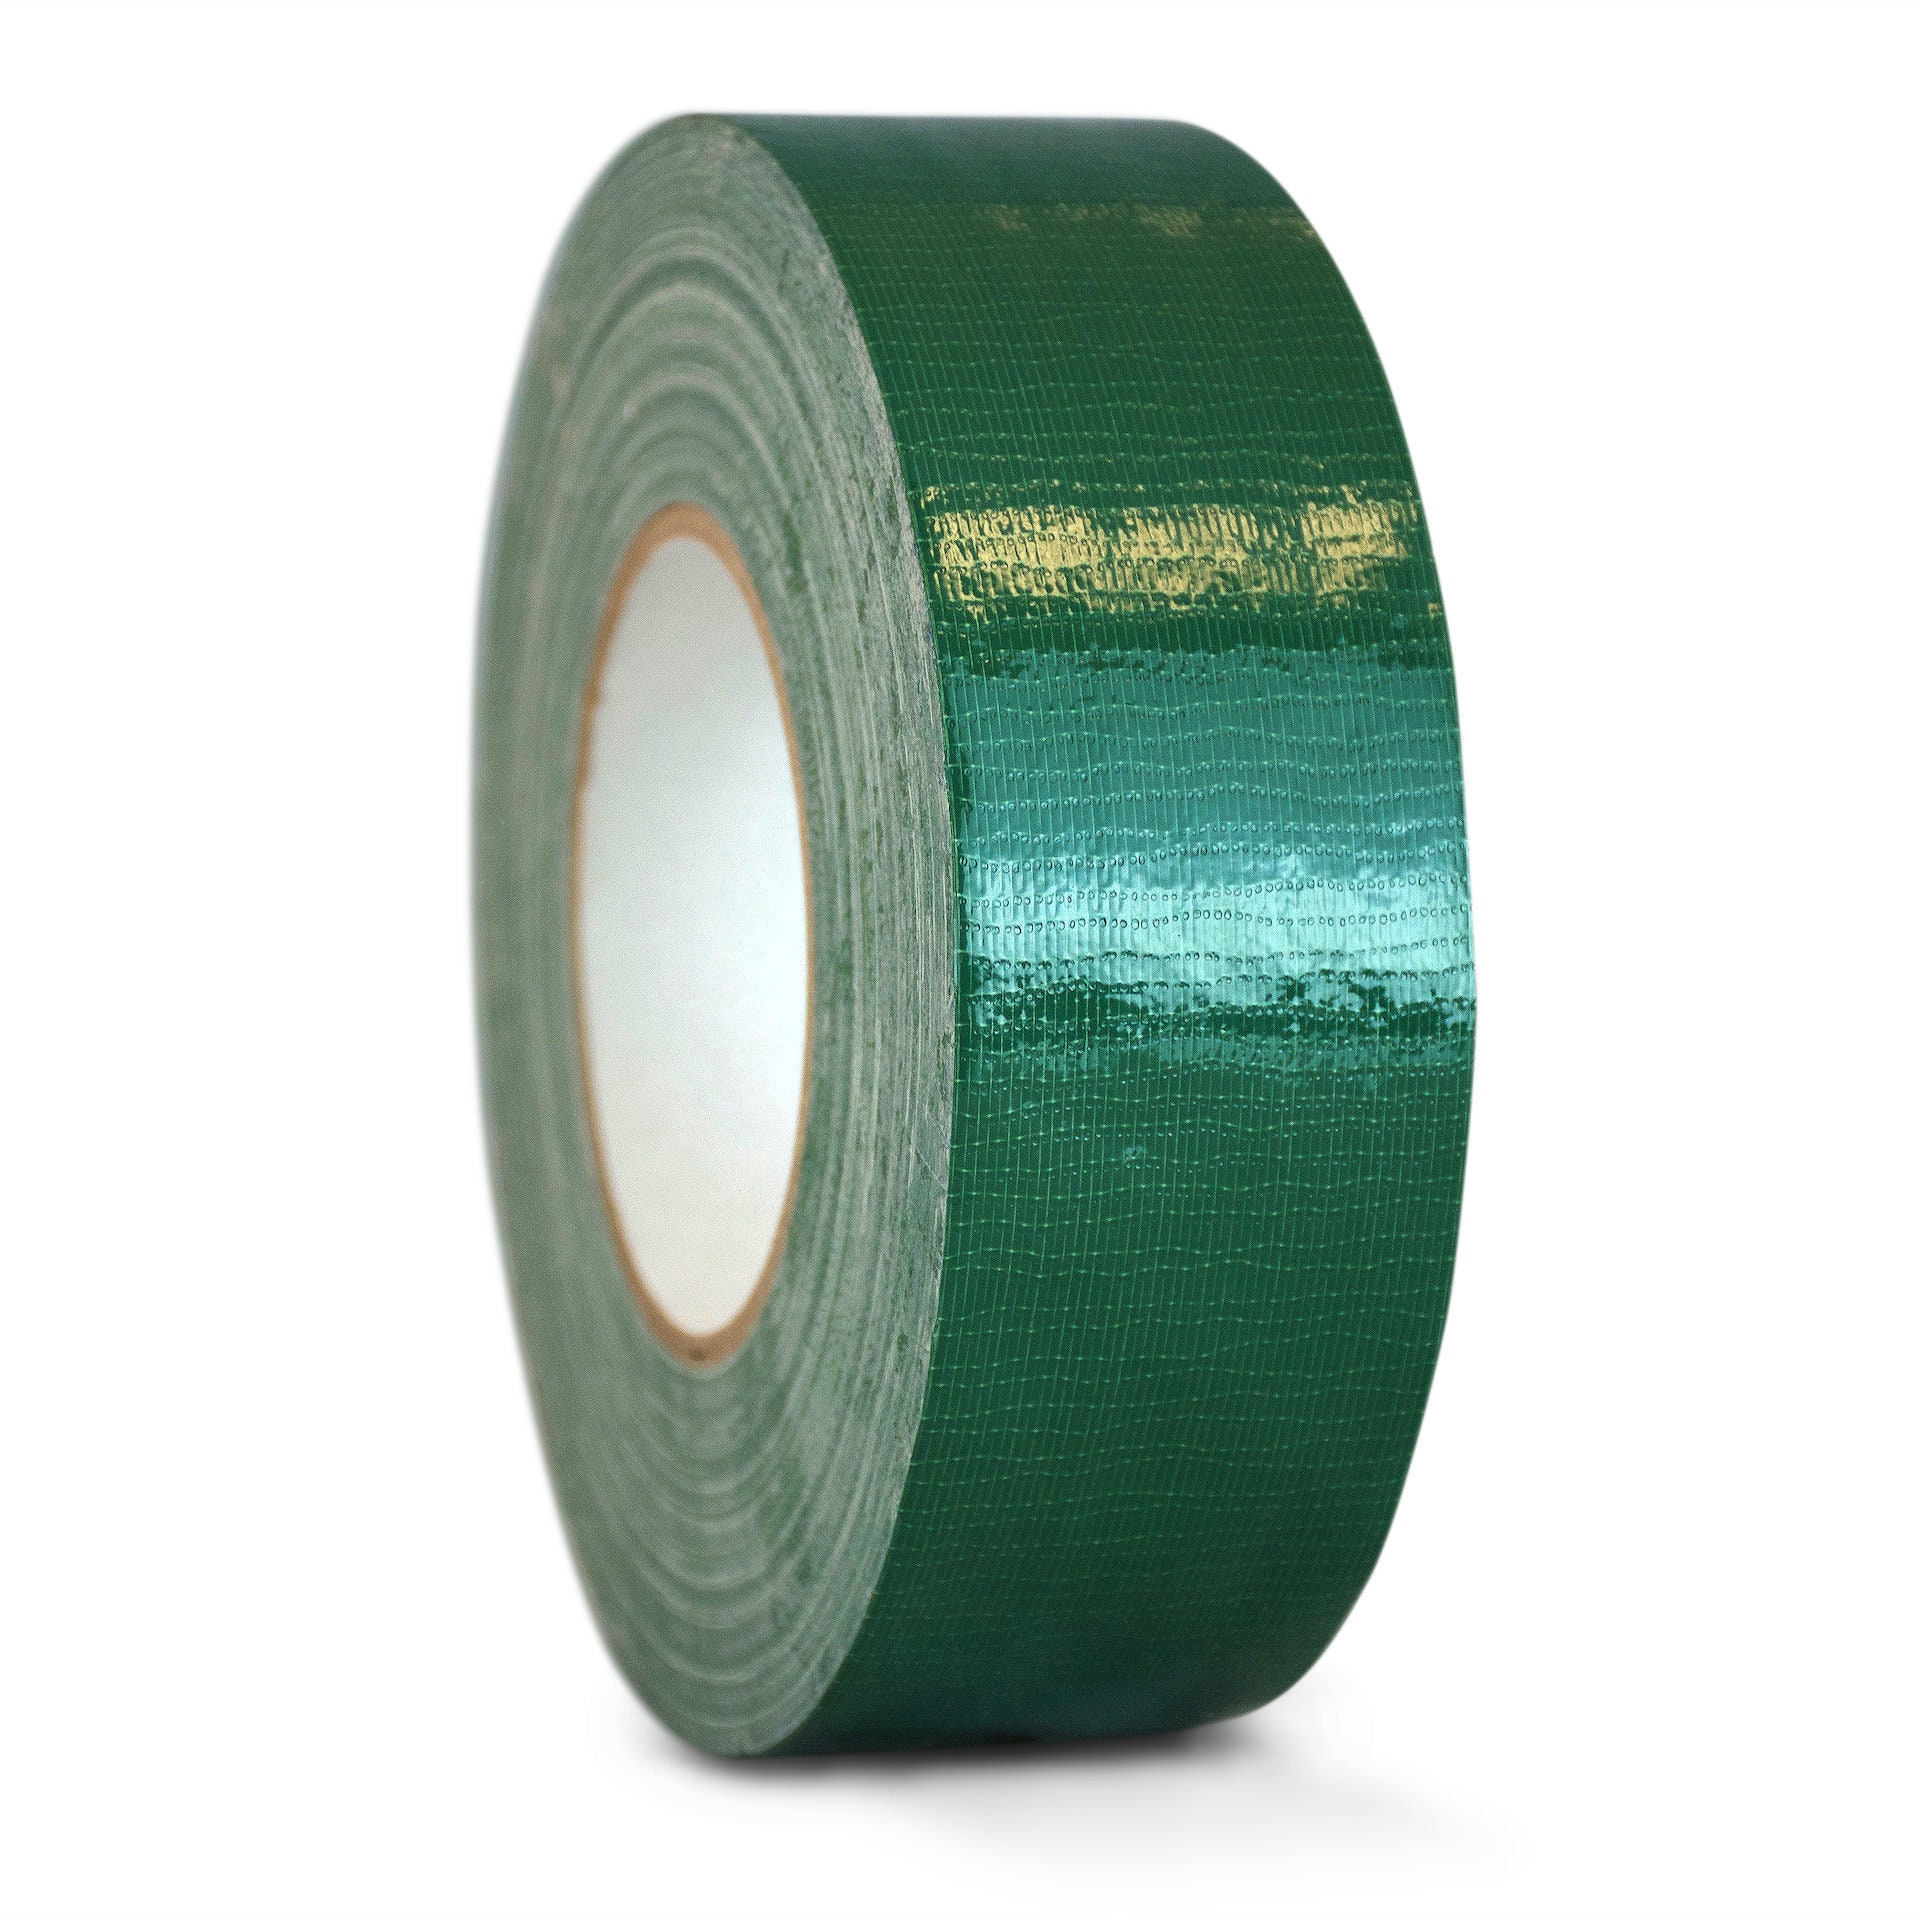 Duct Tape Dark Brown Industrial Grade, 1 x 10' Waterproof, UV Resistant  for Crafts, Home Improvement, Repairs, & Projects 